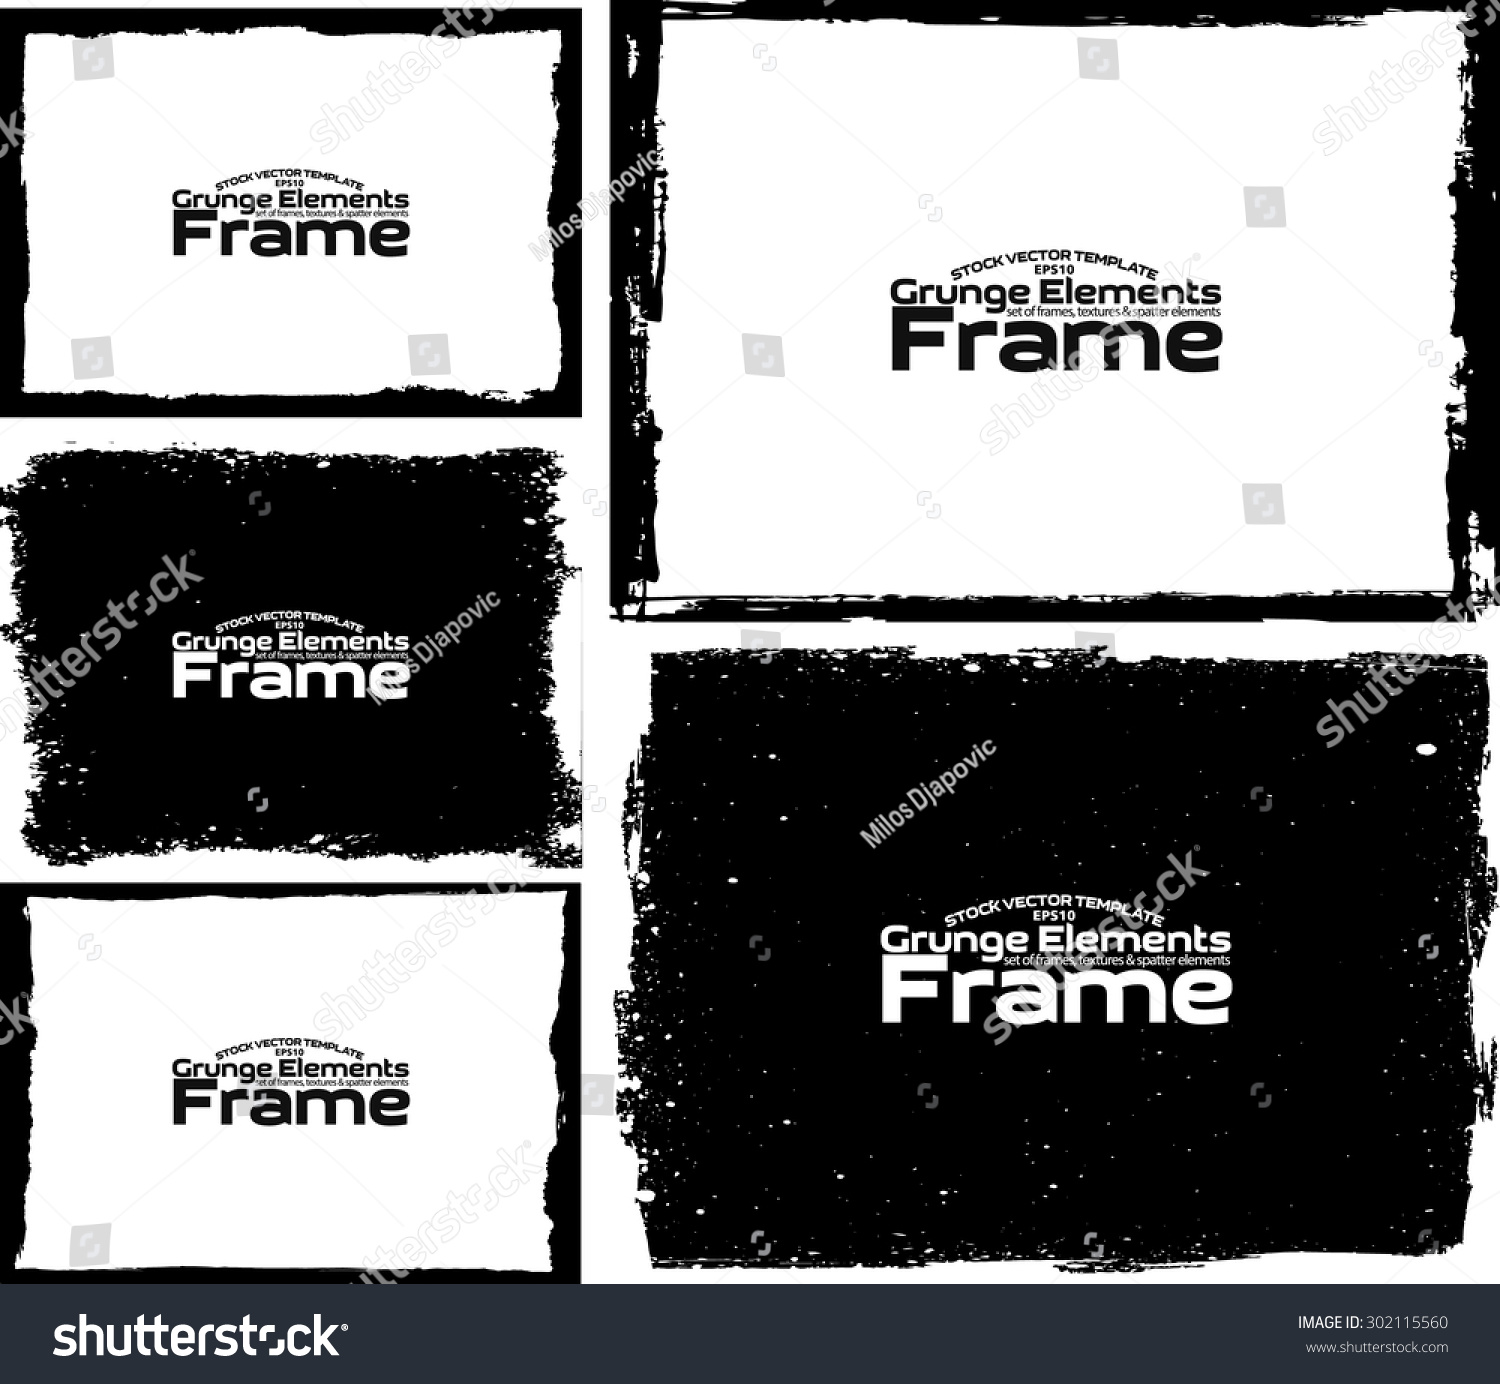 Grunge frame texture set - Abstract design template. Stock vector set - easy to use #302115560